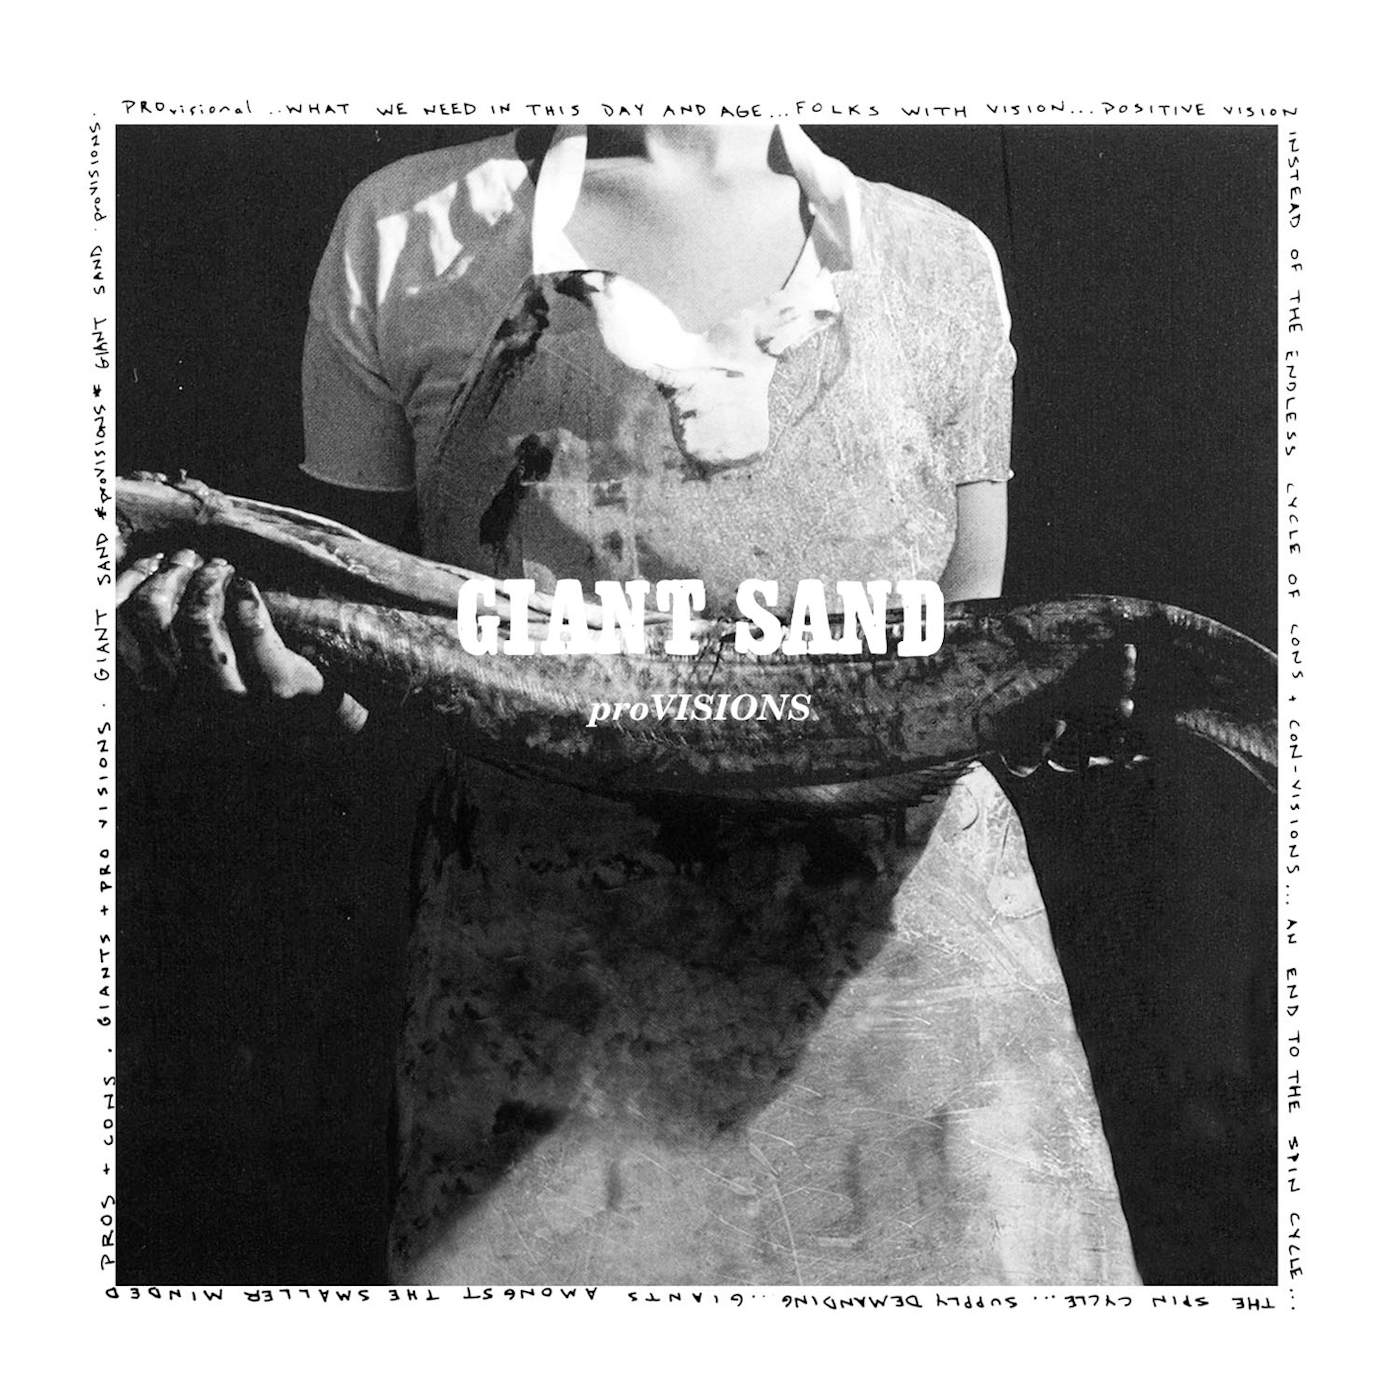 Giant Sand PROVISIONS CD